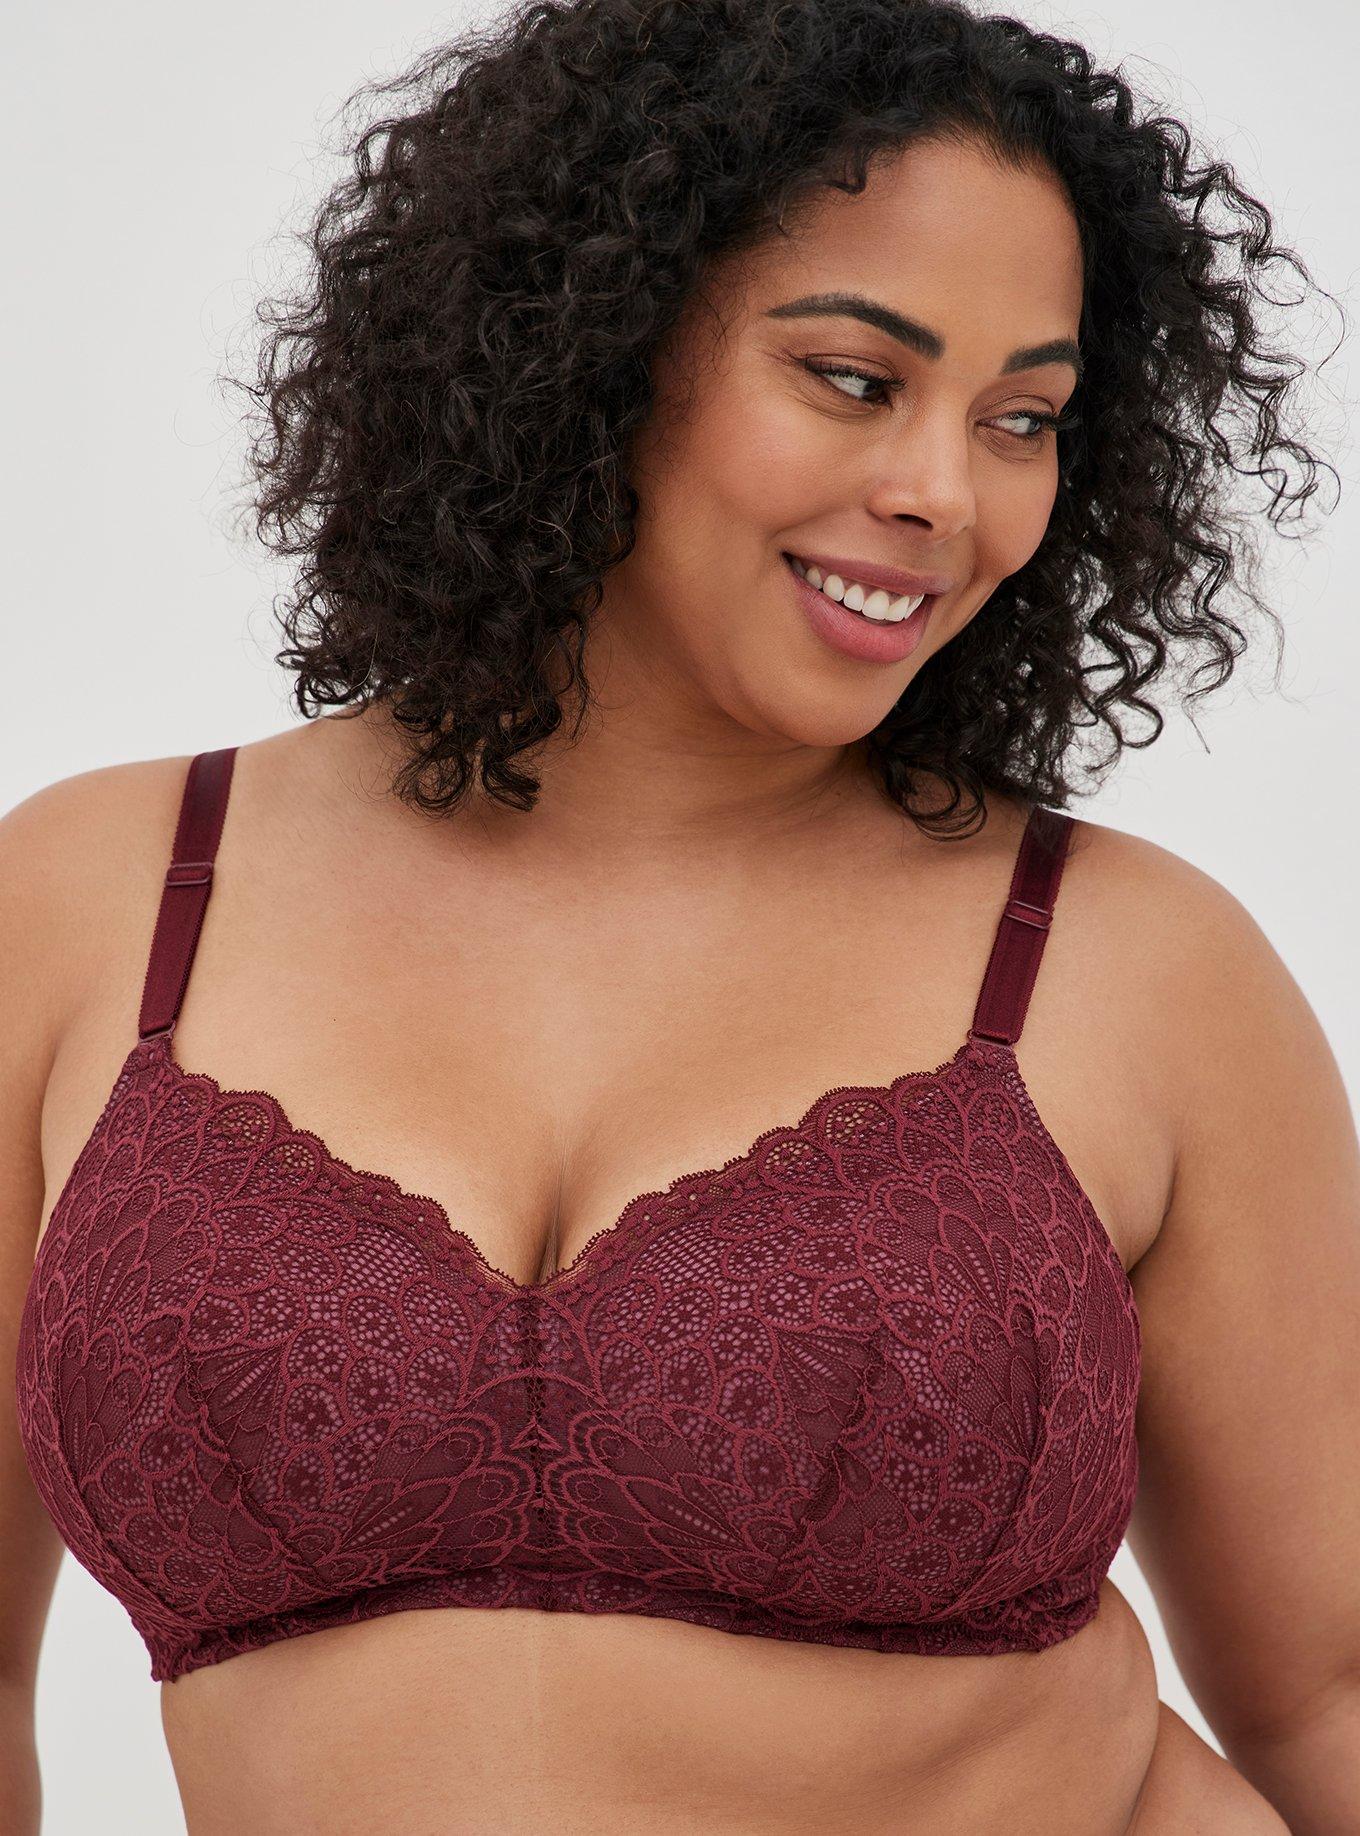 Torrid 44C NWT Everyday Wire-Free Lightly Lined Print 360° Back Smoothing  Bra Size 44 C - $29 (42% Off Retail) New With Tags - From Lisa